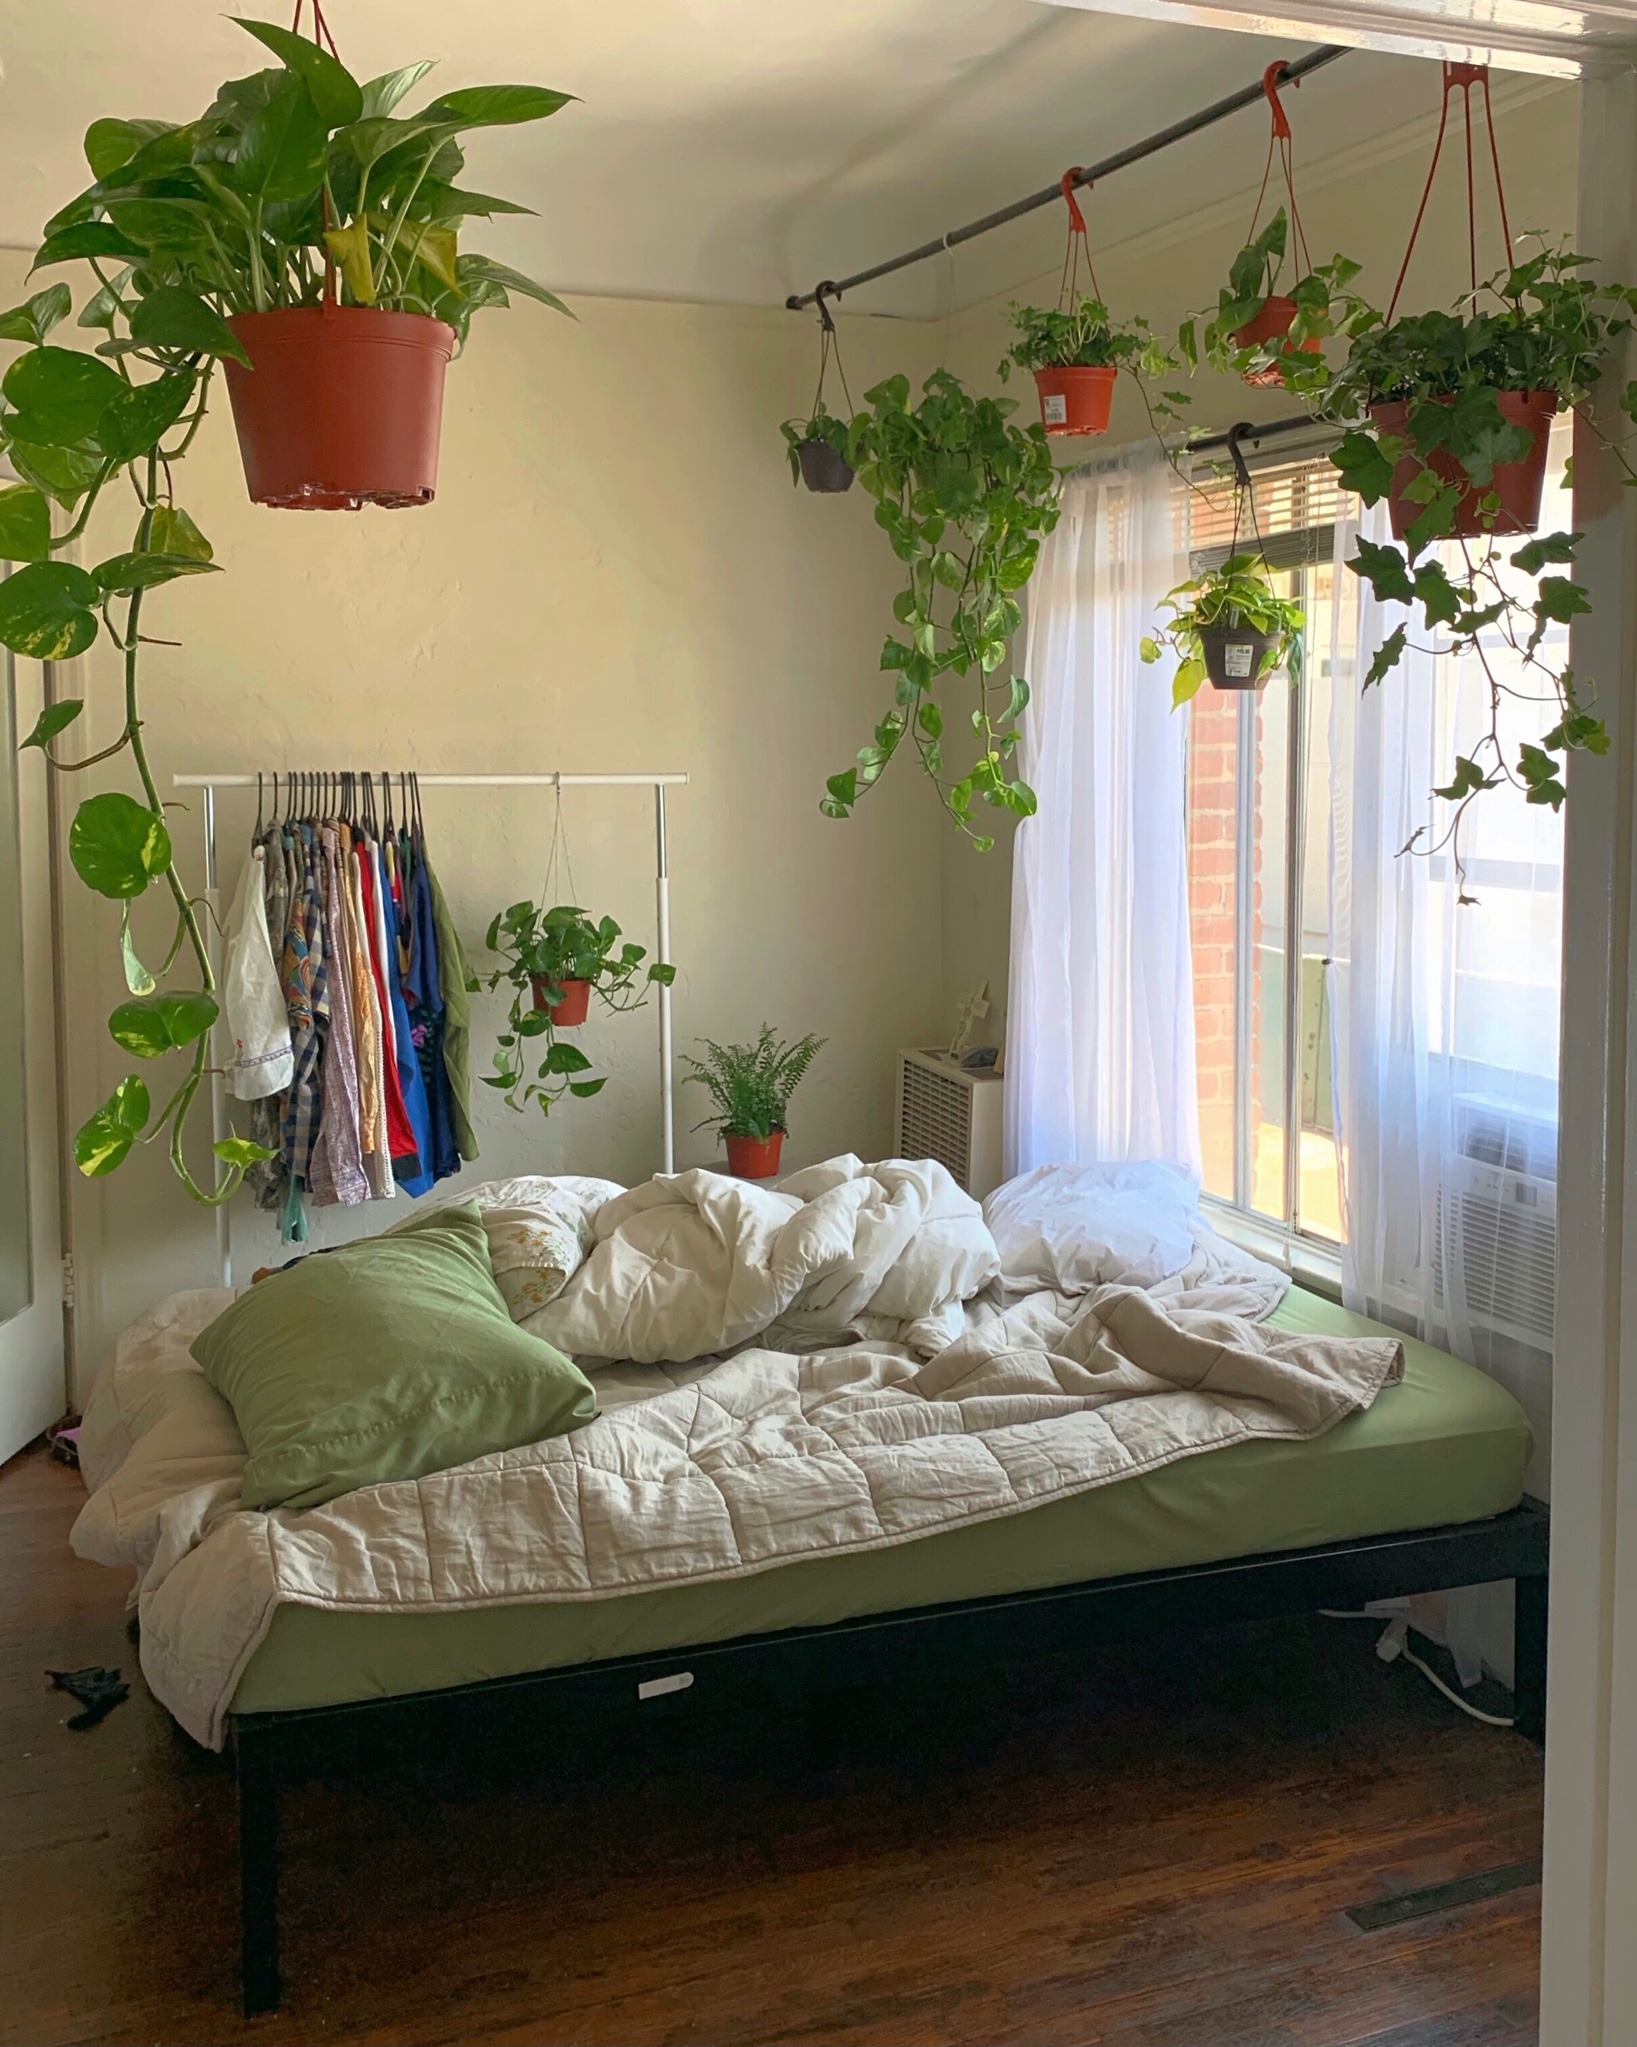 celestialyouth:still want more plants tbh adult photos